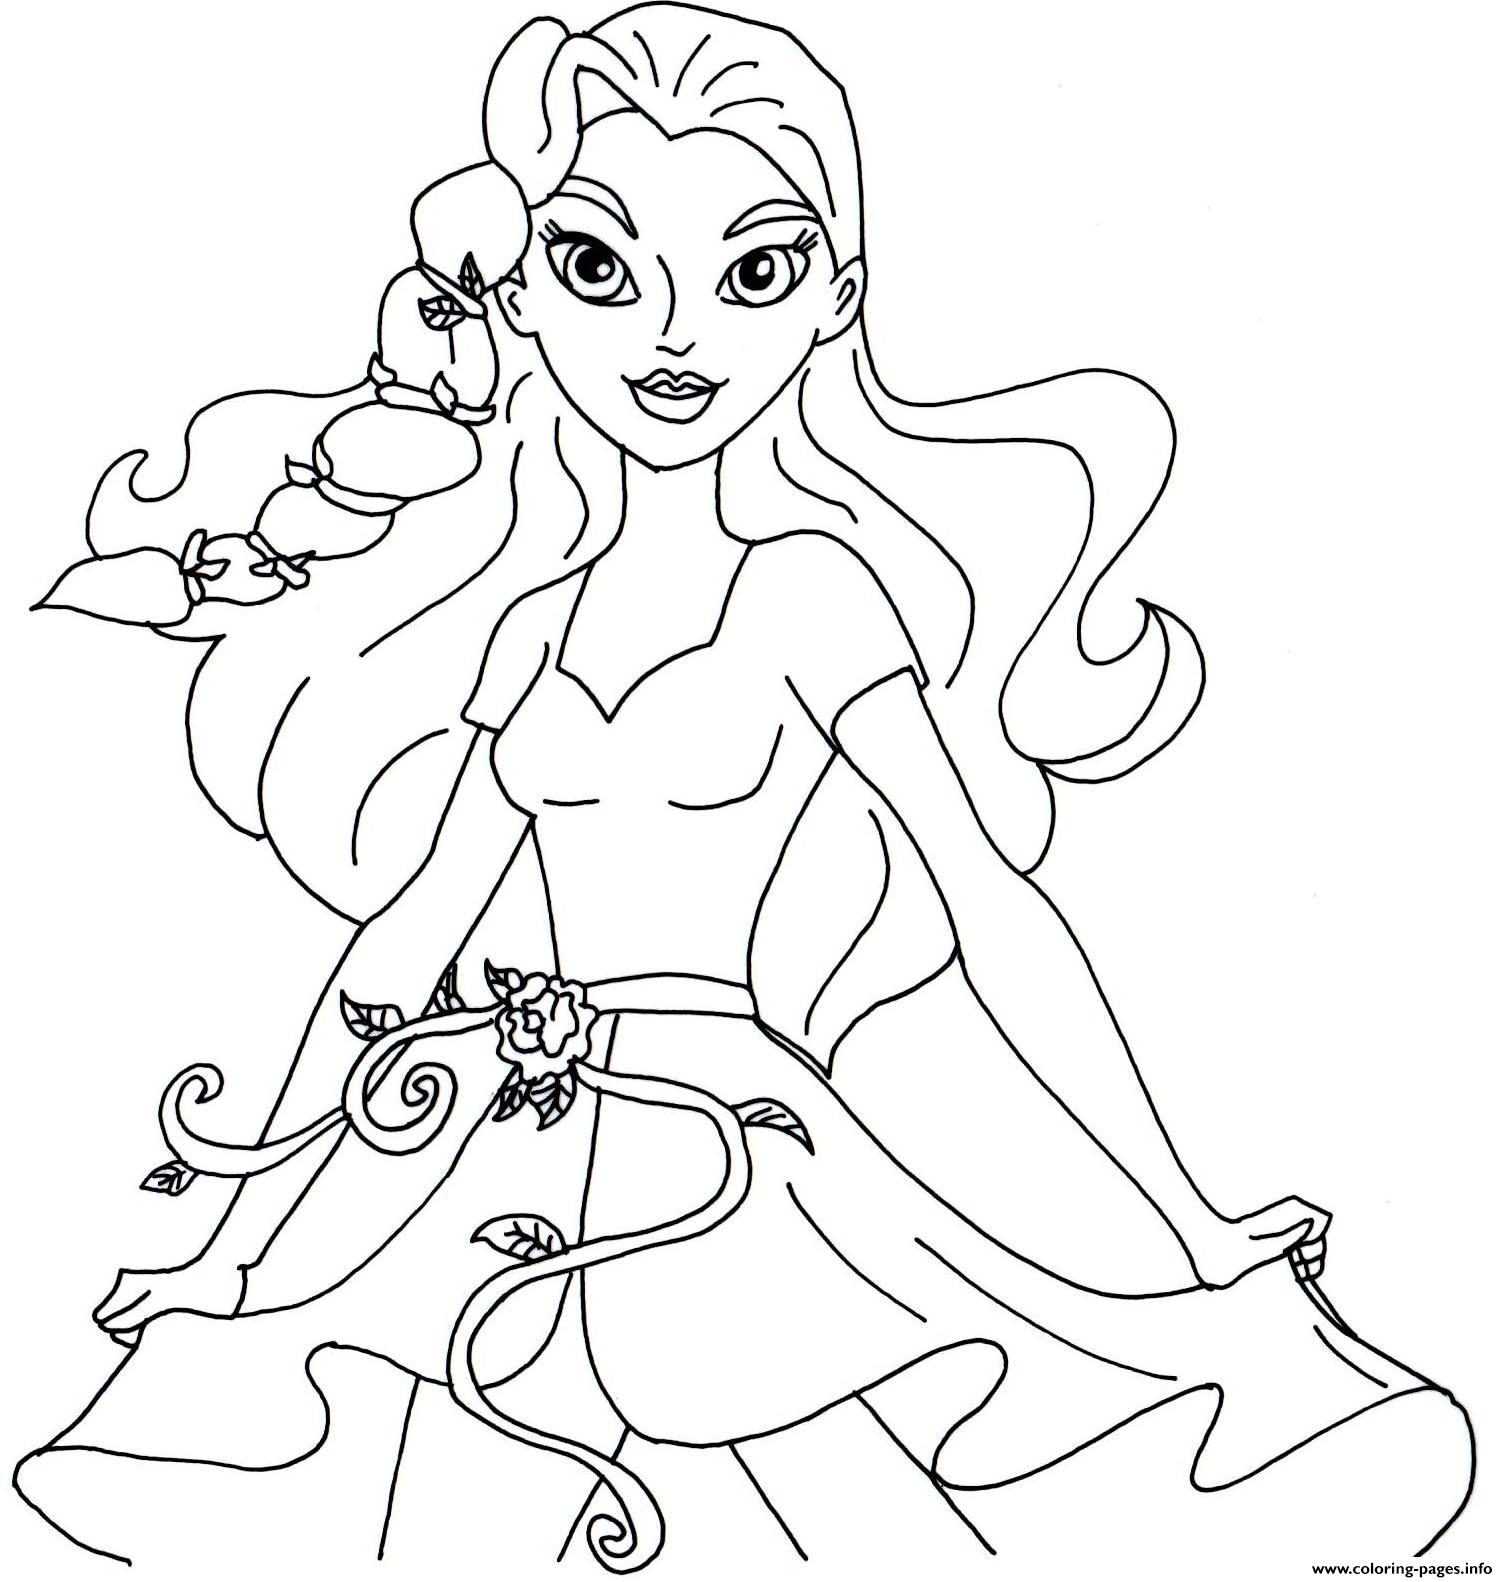 Poison Ivy Coloring Pages - Coloring Home